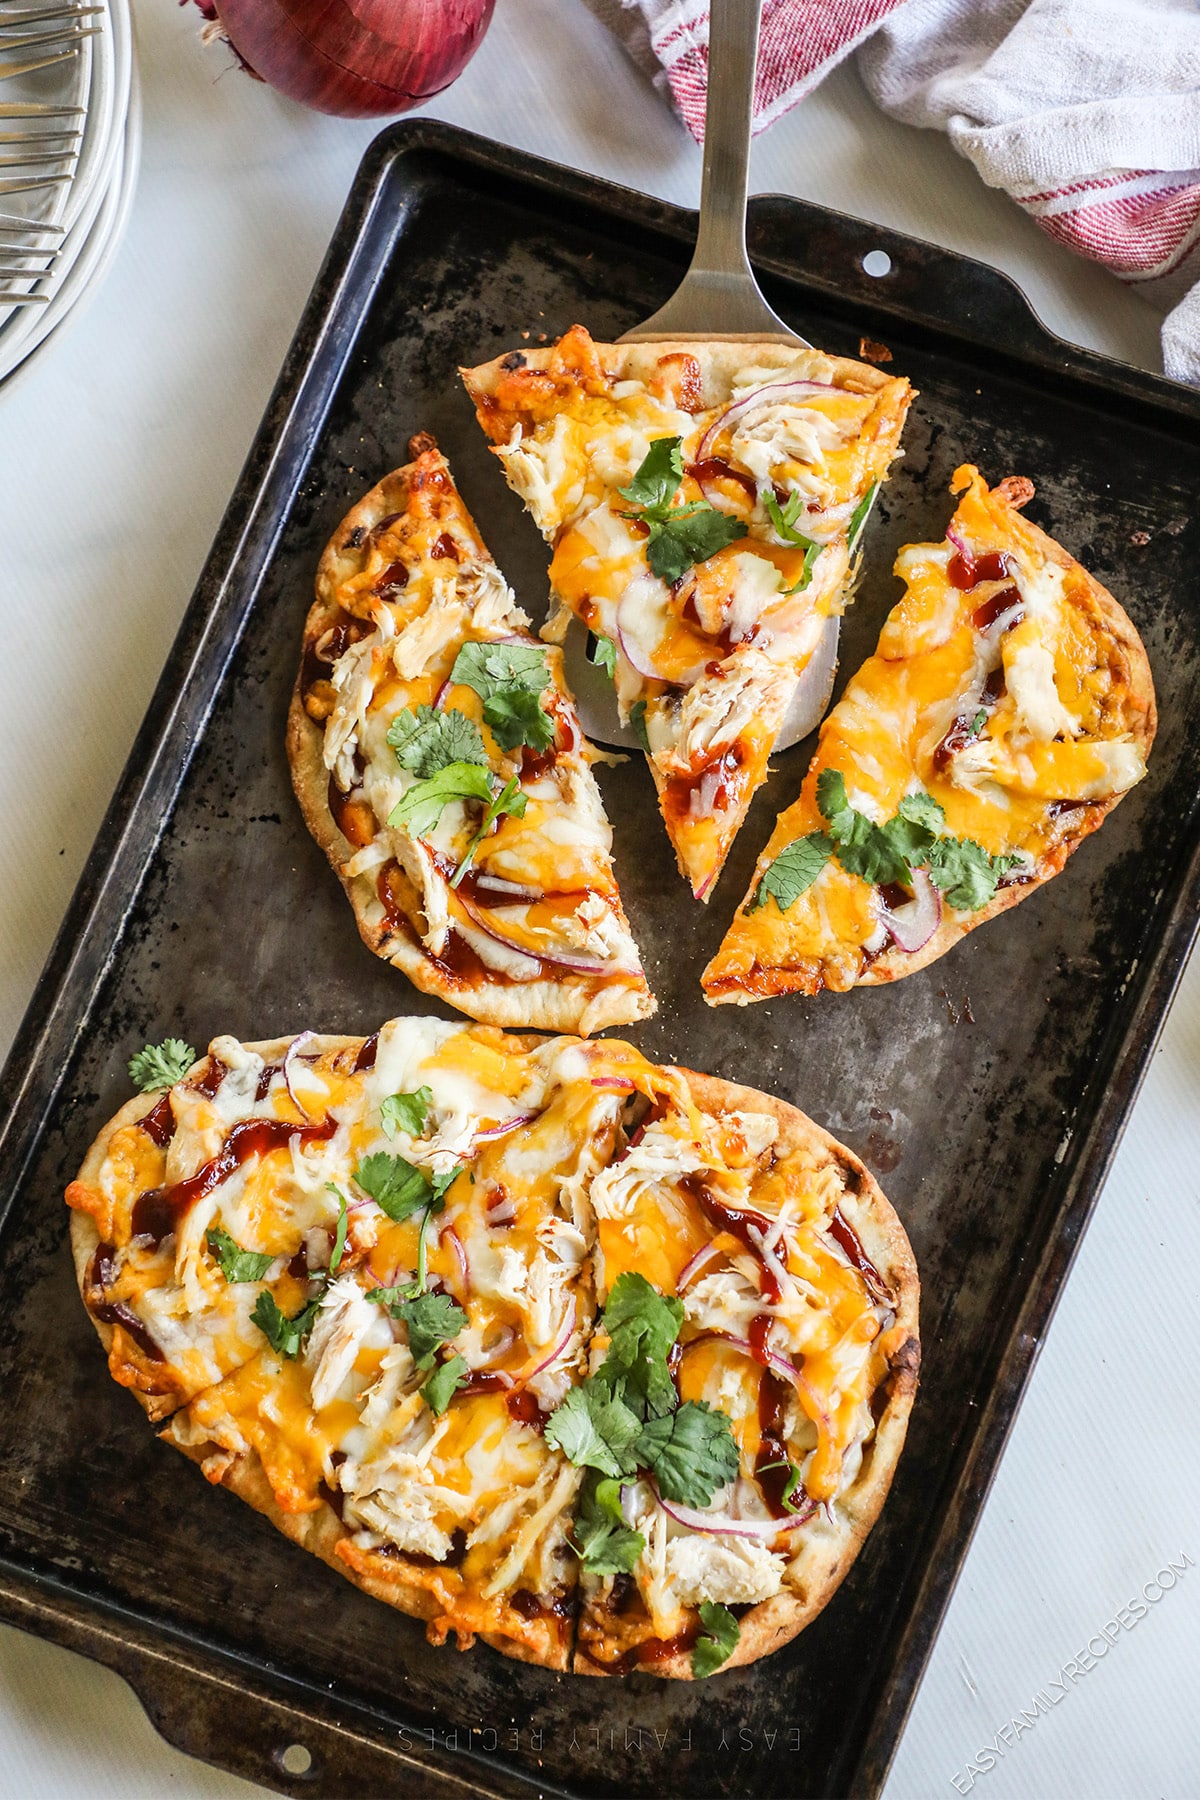 two flatbread pizzas on a baking sheet with one cut into slices.